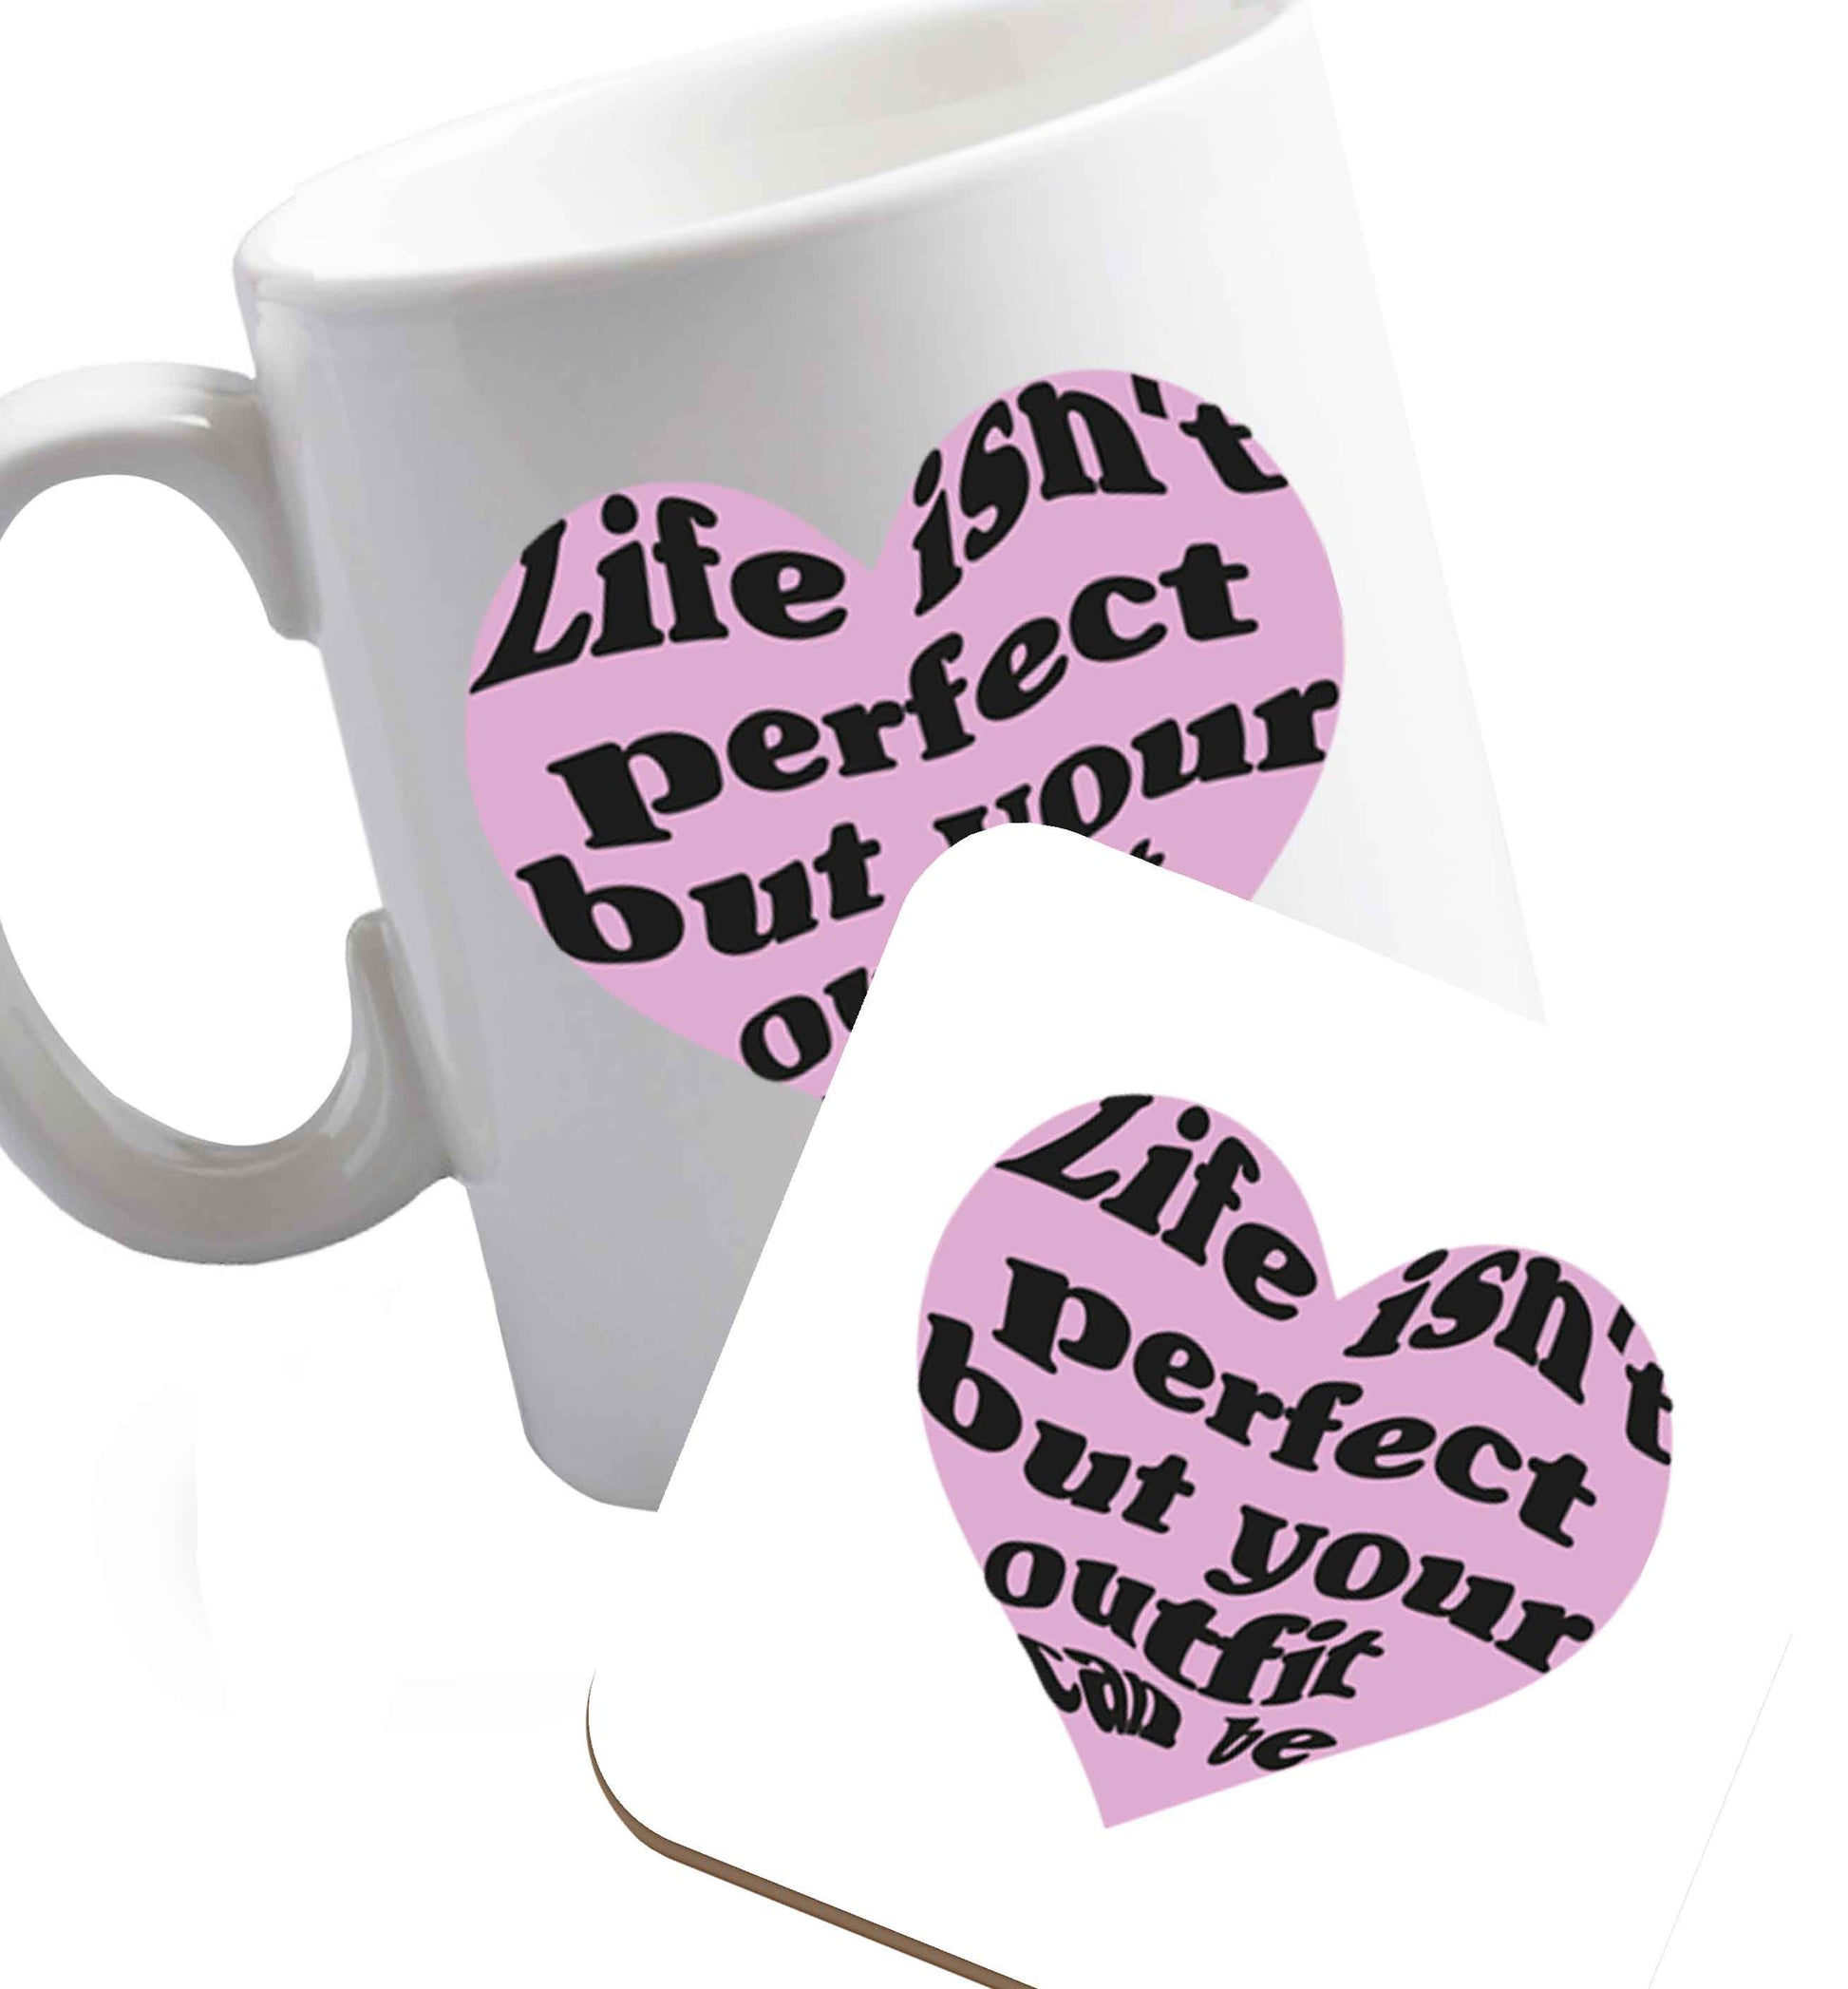 10 oz Life isn't perfect but your outfit can be  ceramic mug and coaster set right handed